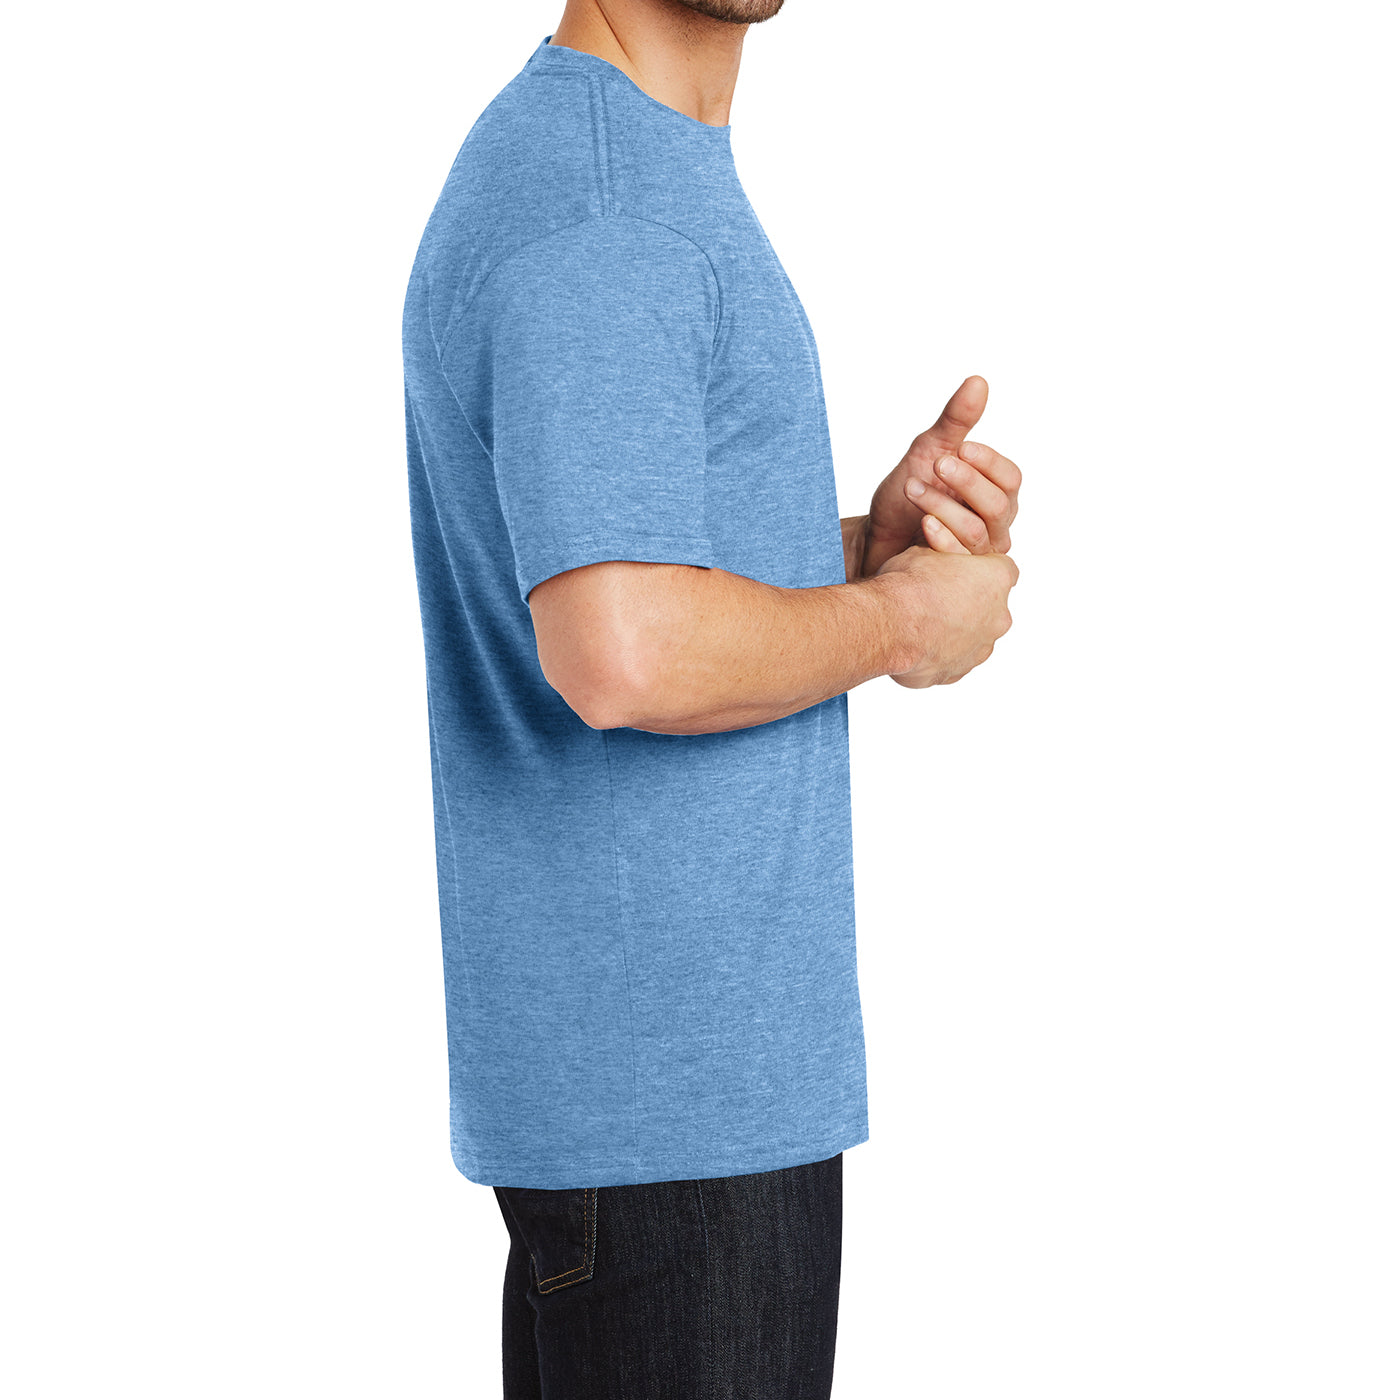 Mens Perfect Weight Crew Tee - Clean Denim- Side